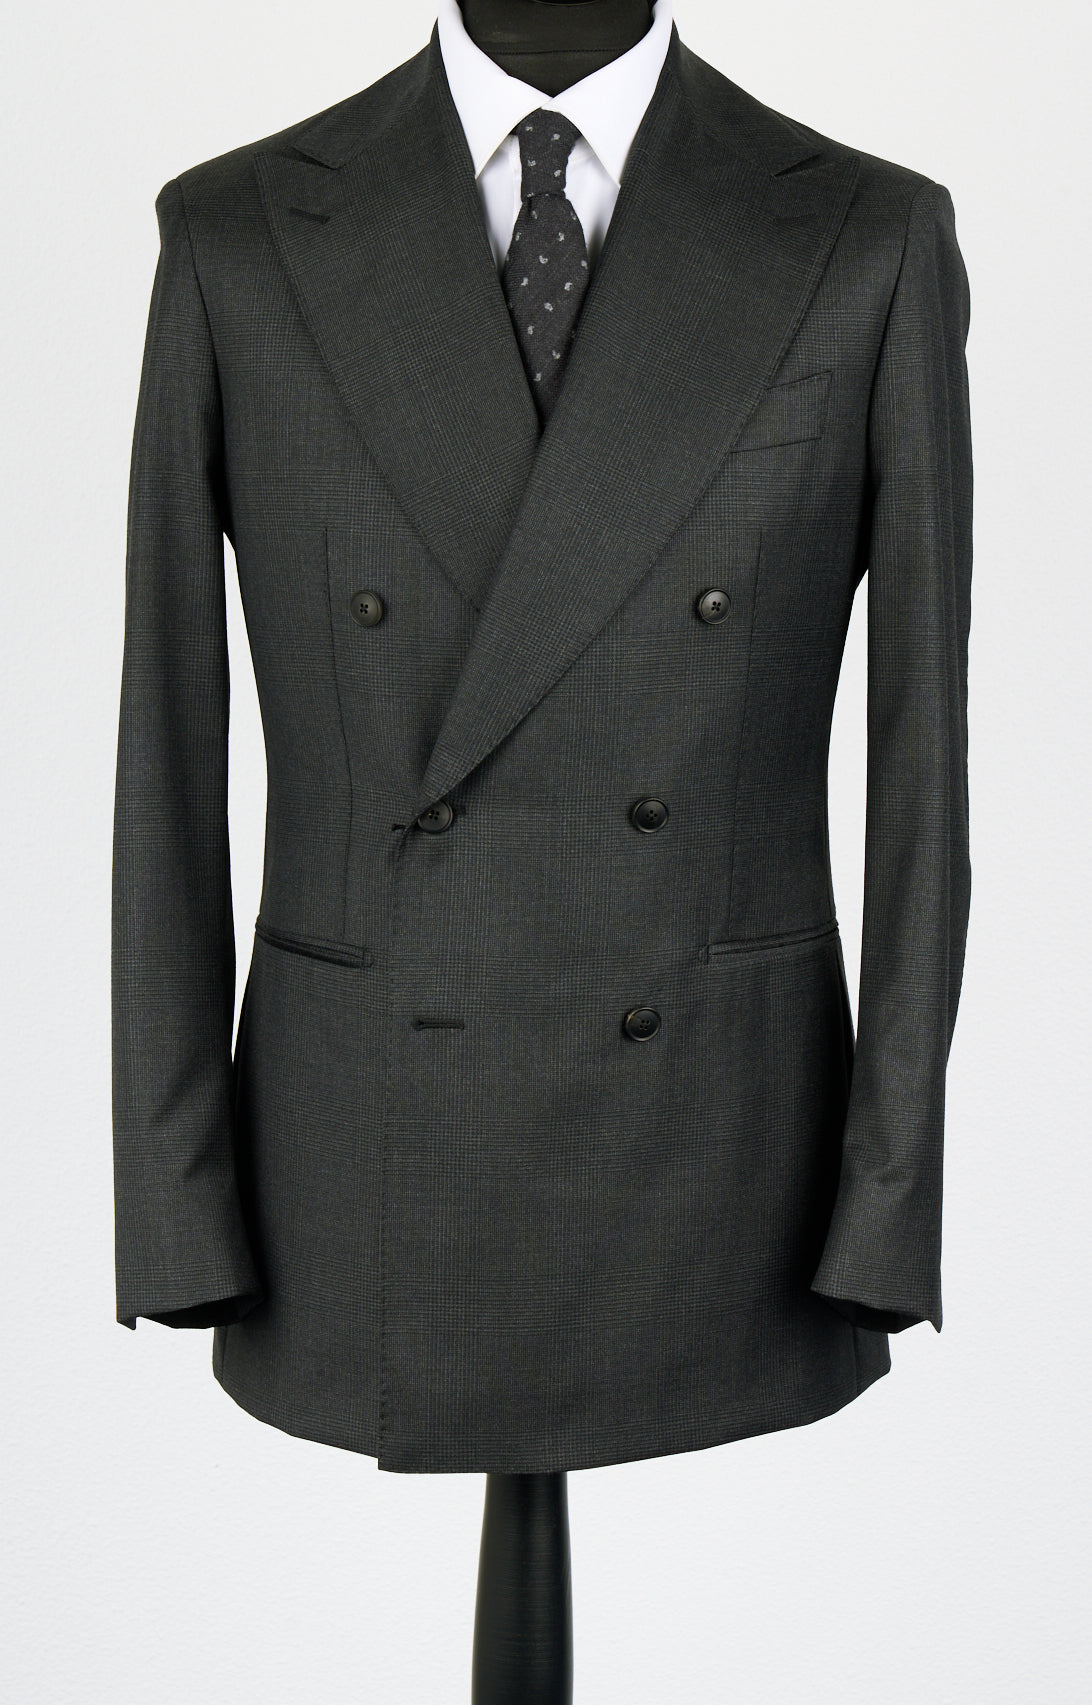 New SUITREVIEW Elmhurst Charcoal Check Pure Wool All Season Super 110s Suit - Size 36S, 38R, 40S, 40R, 42S, 42R